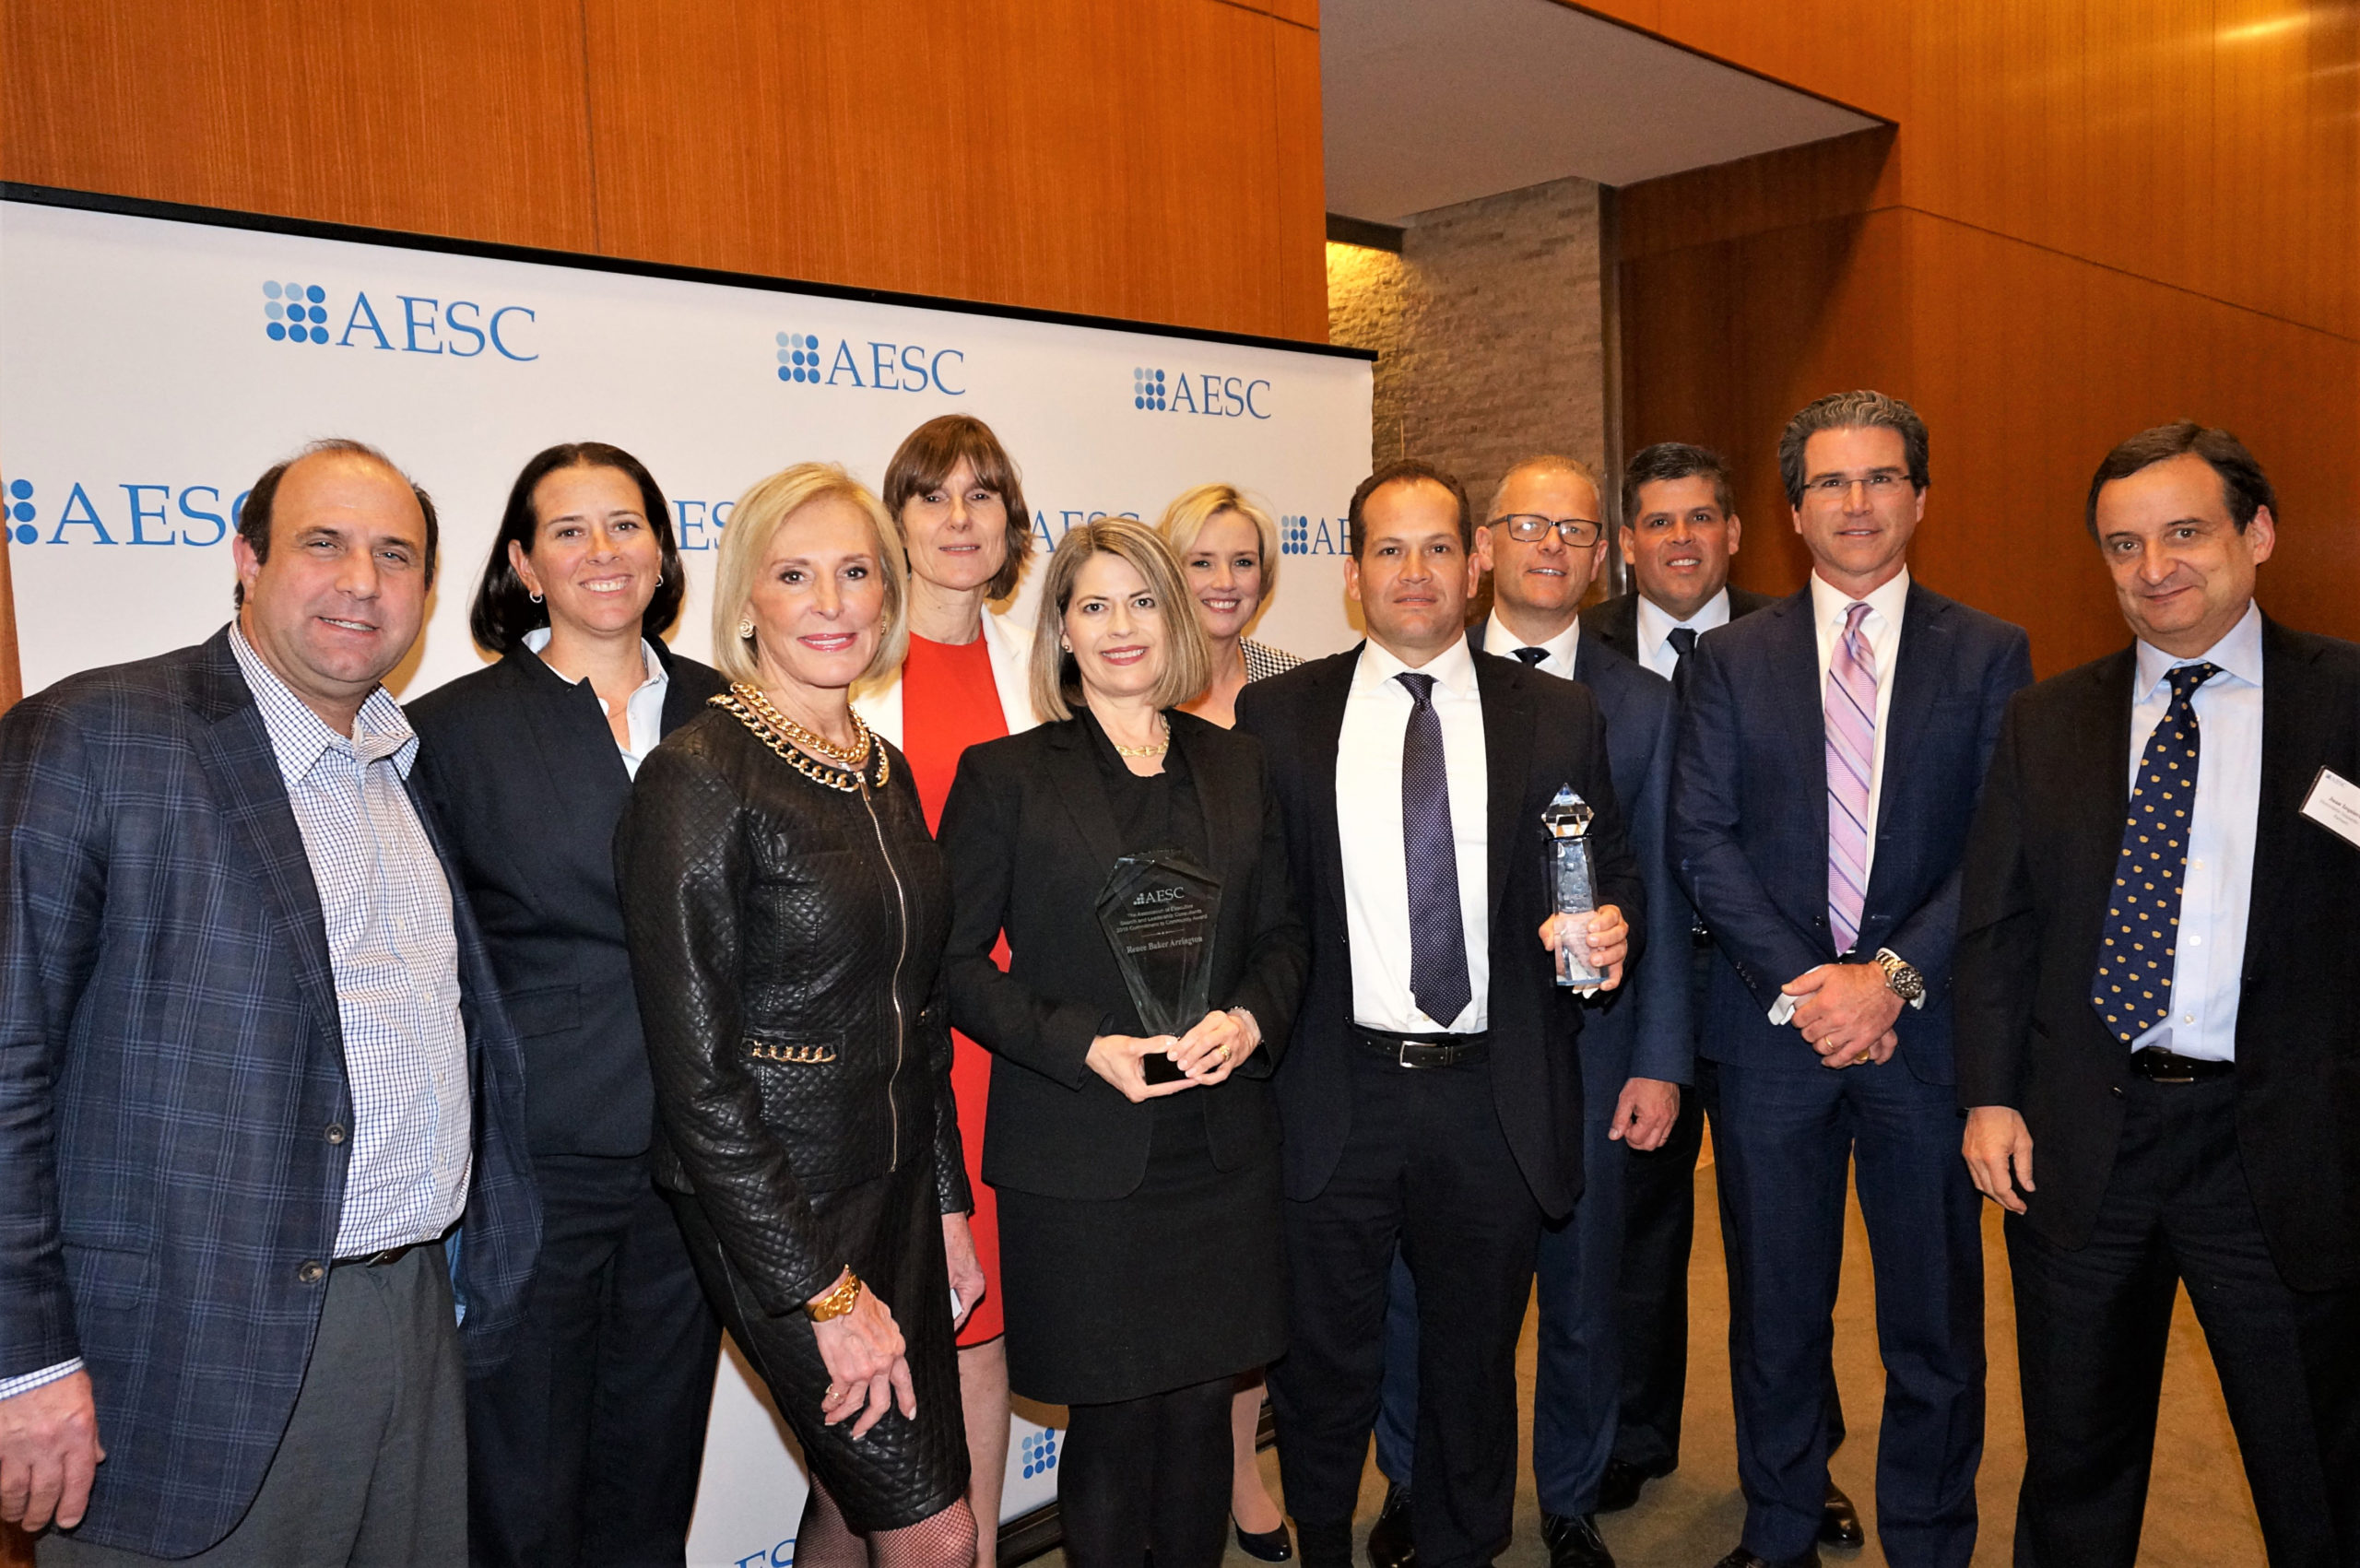 IIC Partners Receives Two Awards at AESC Global Conference IIC Partners